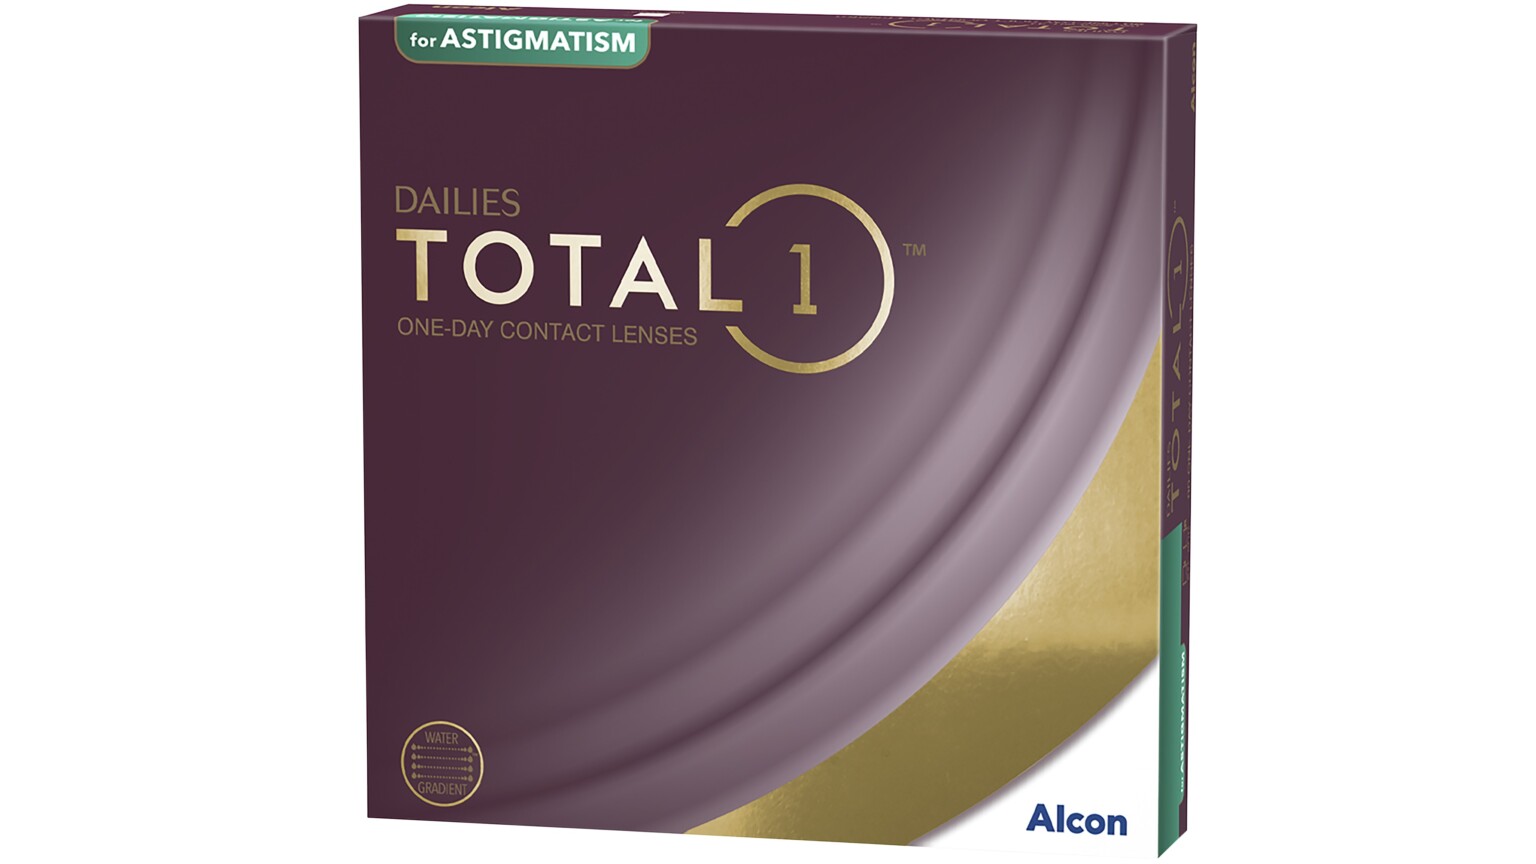 alcon-dailies-total-1-for-astigmatism-90-pack-visique-optometrists